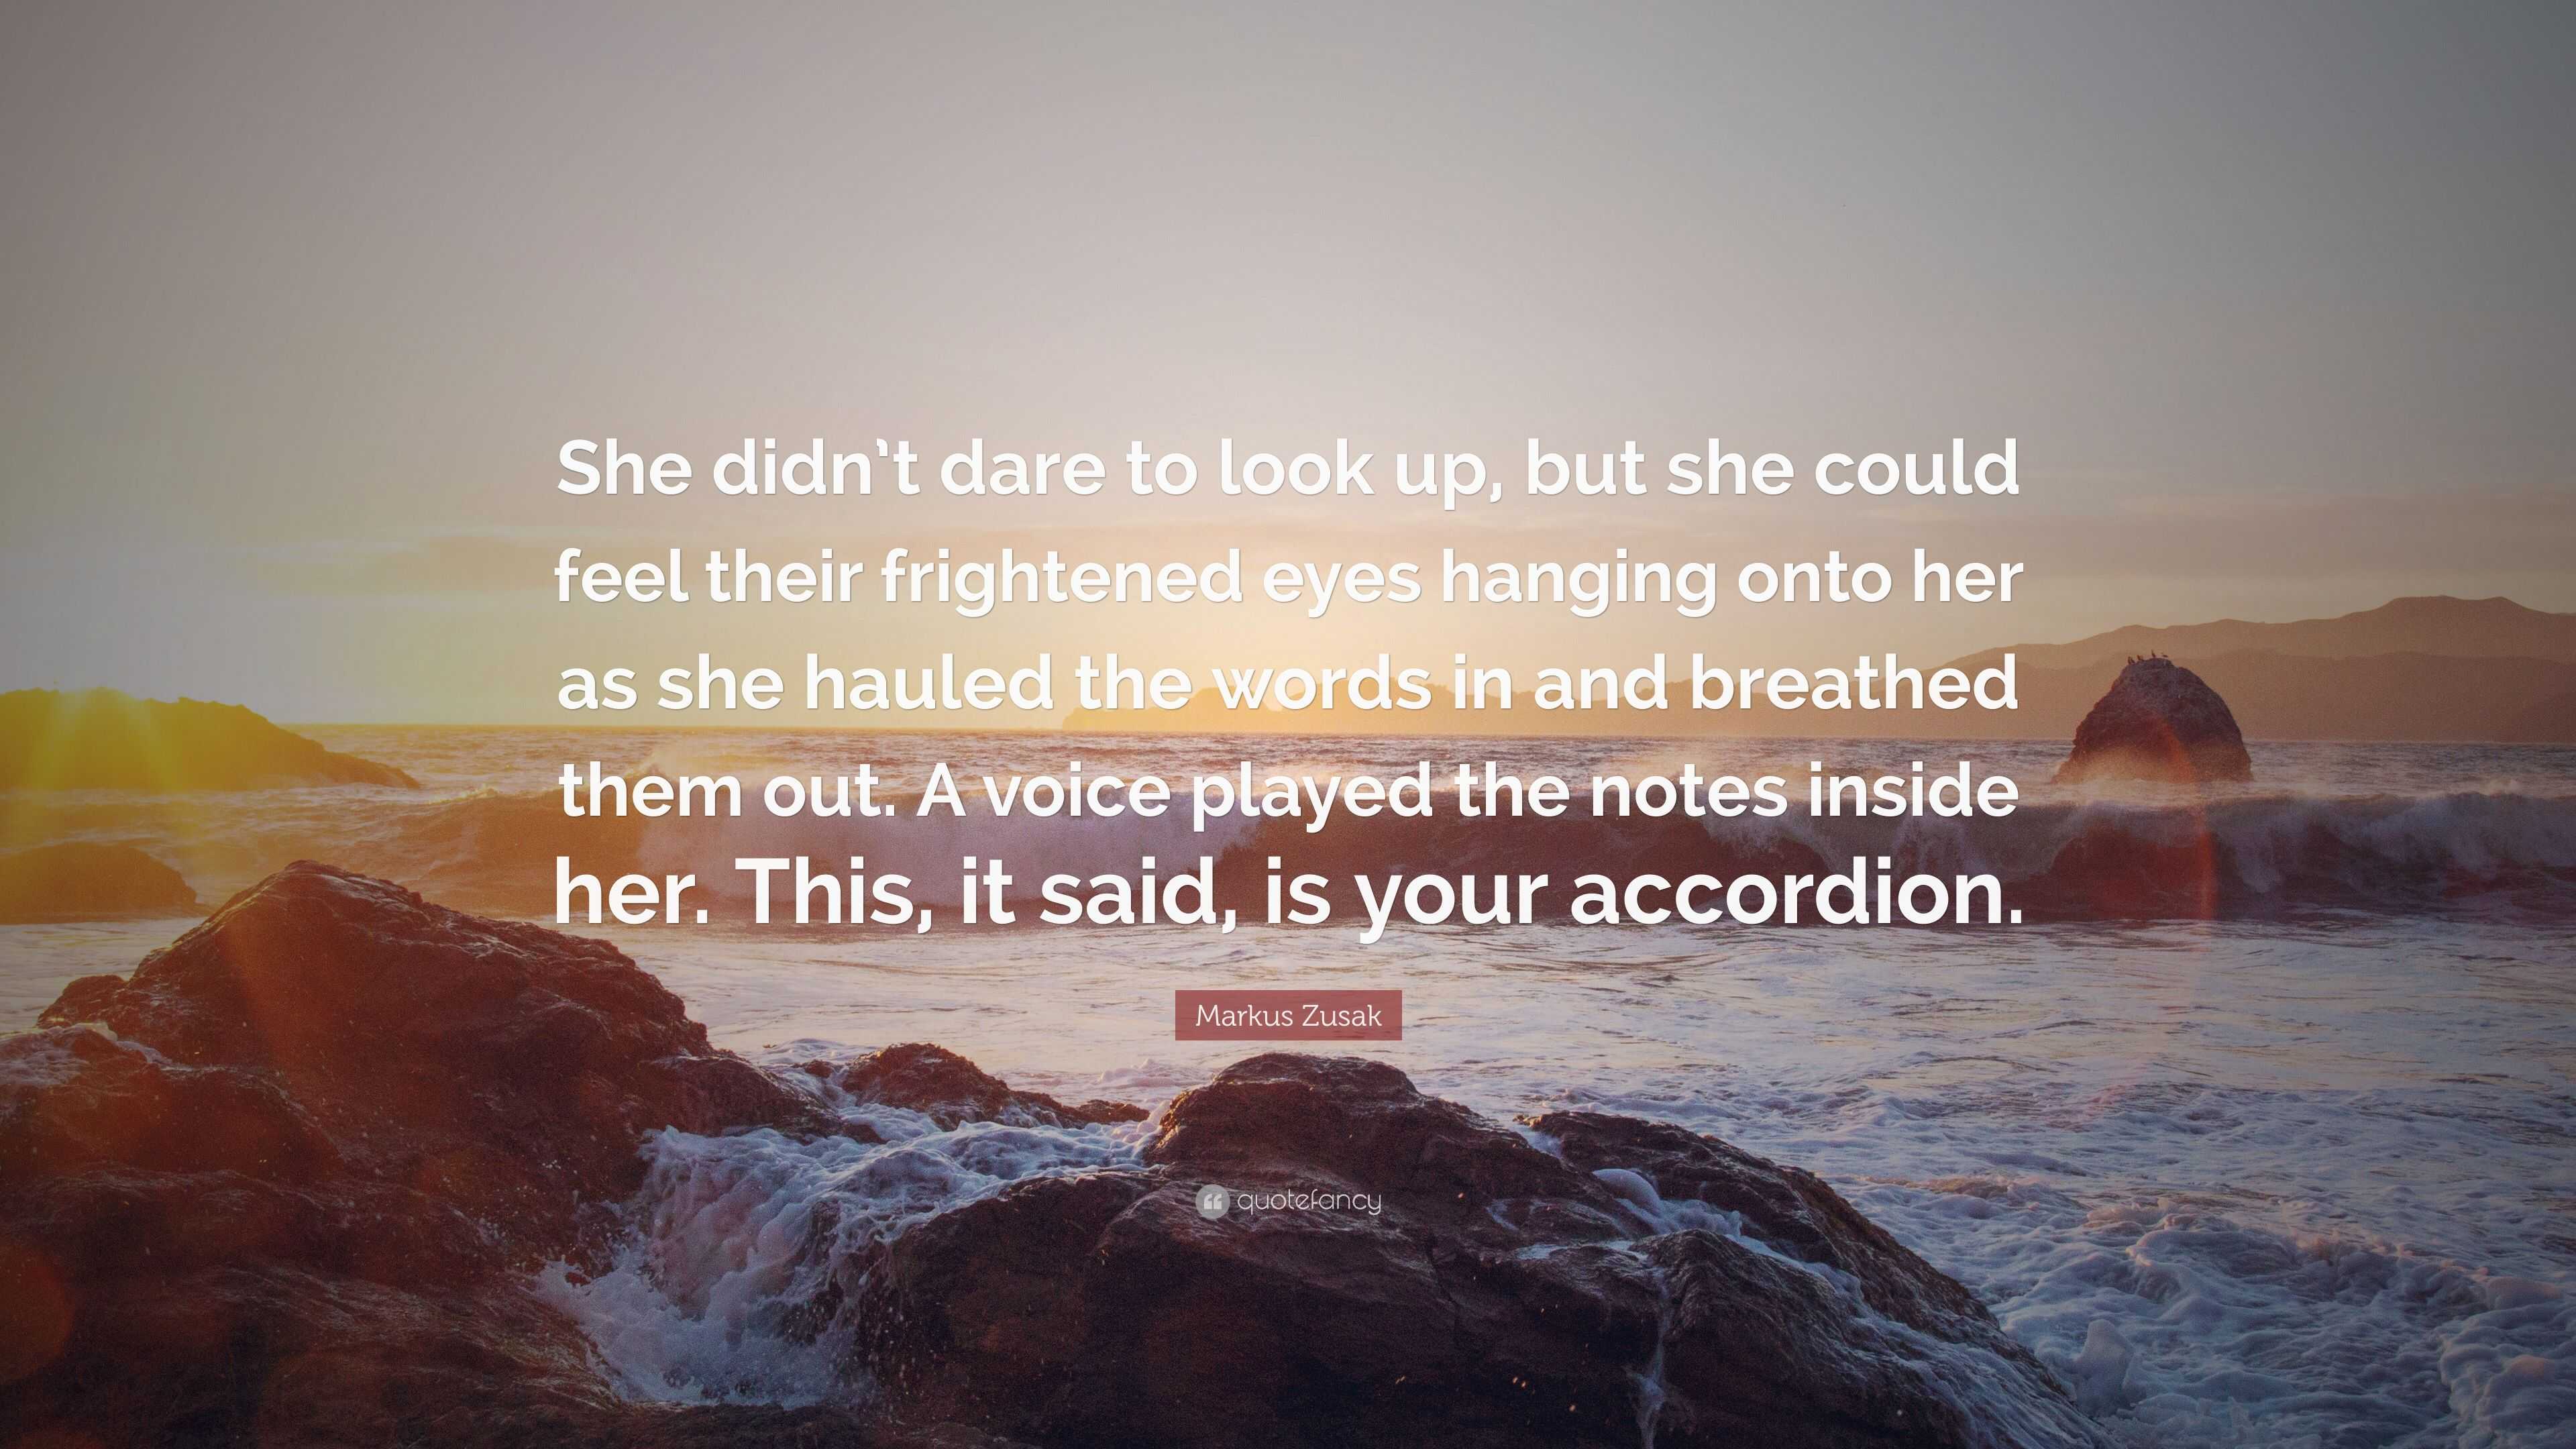 Markus Zusak Quote: “She didn’t dare to look up, but she could feel ...